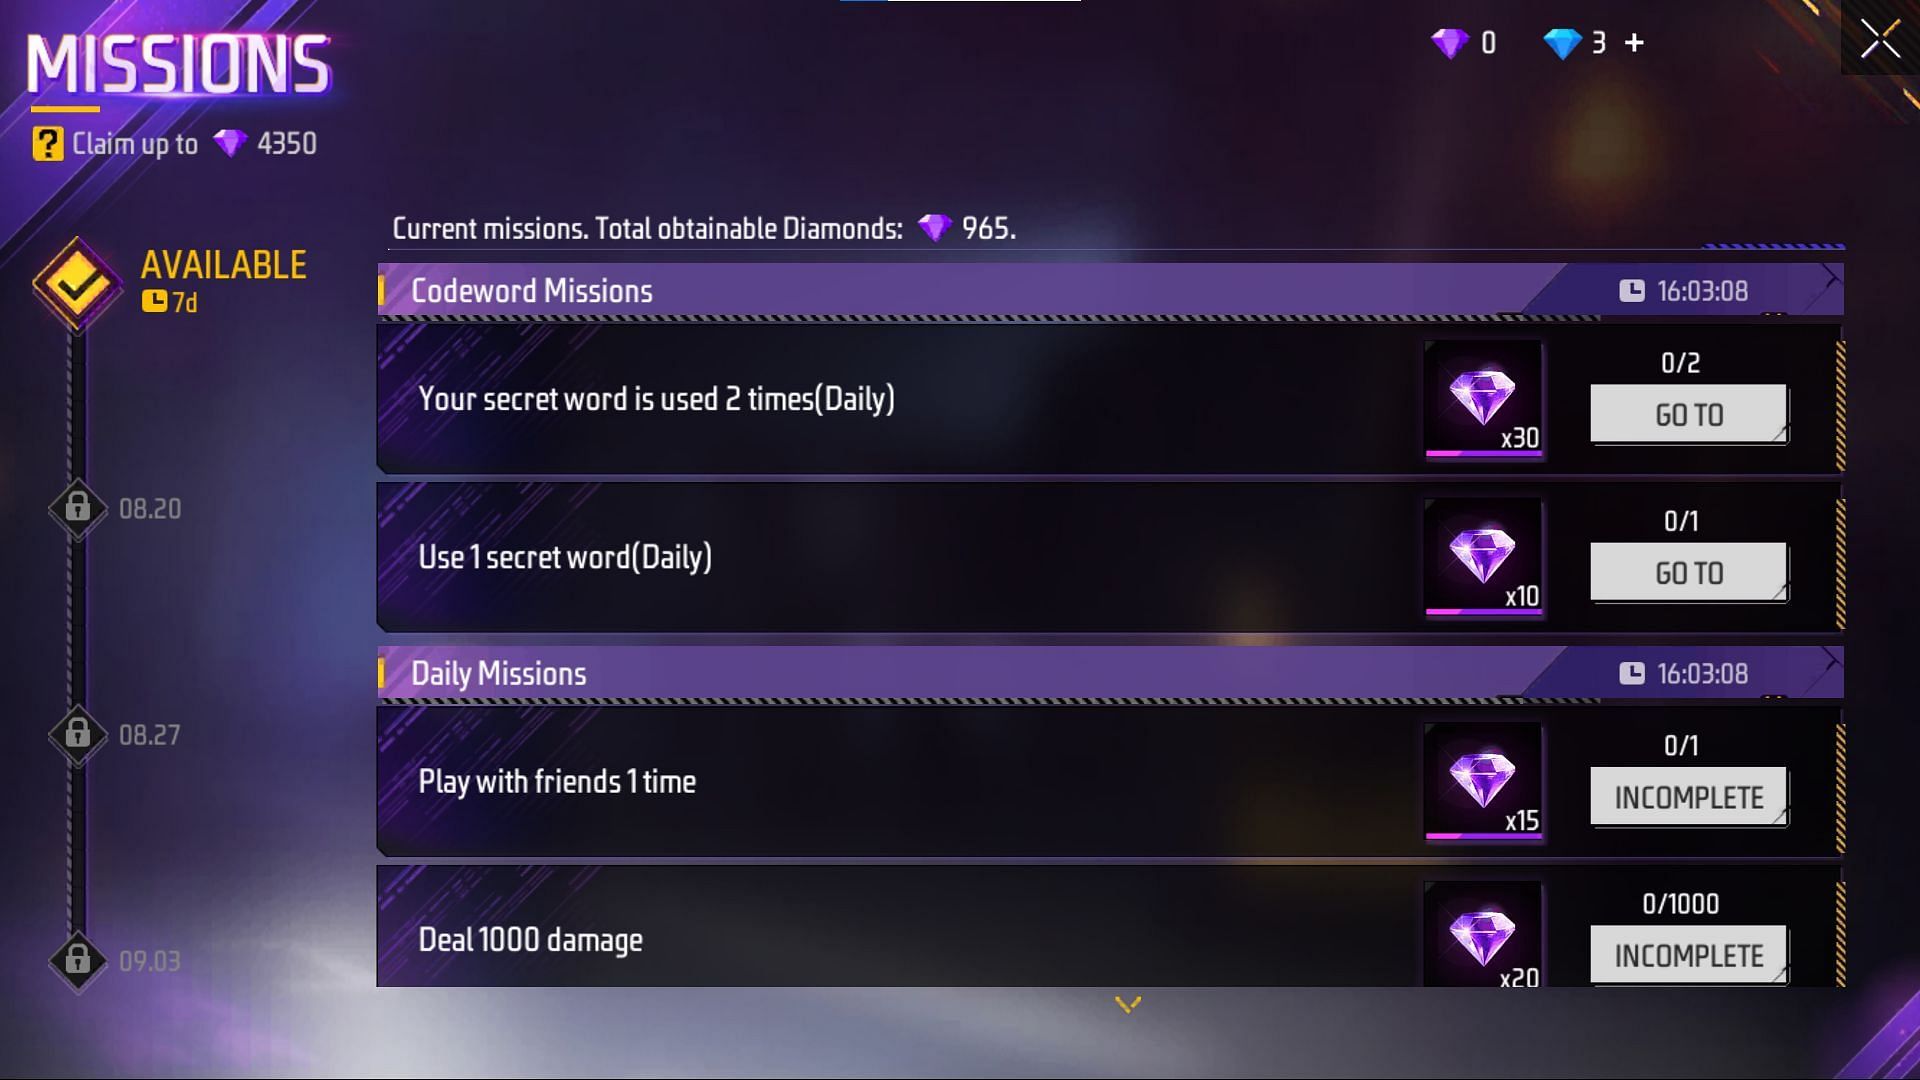 Users can go ahead and complete the missions (Image via Garena)